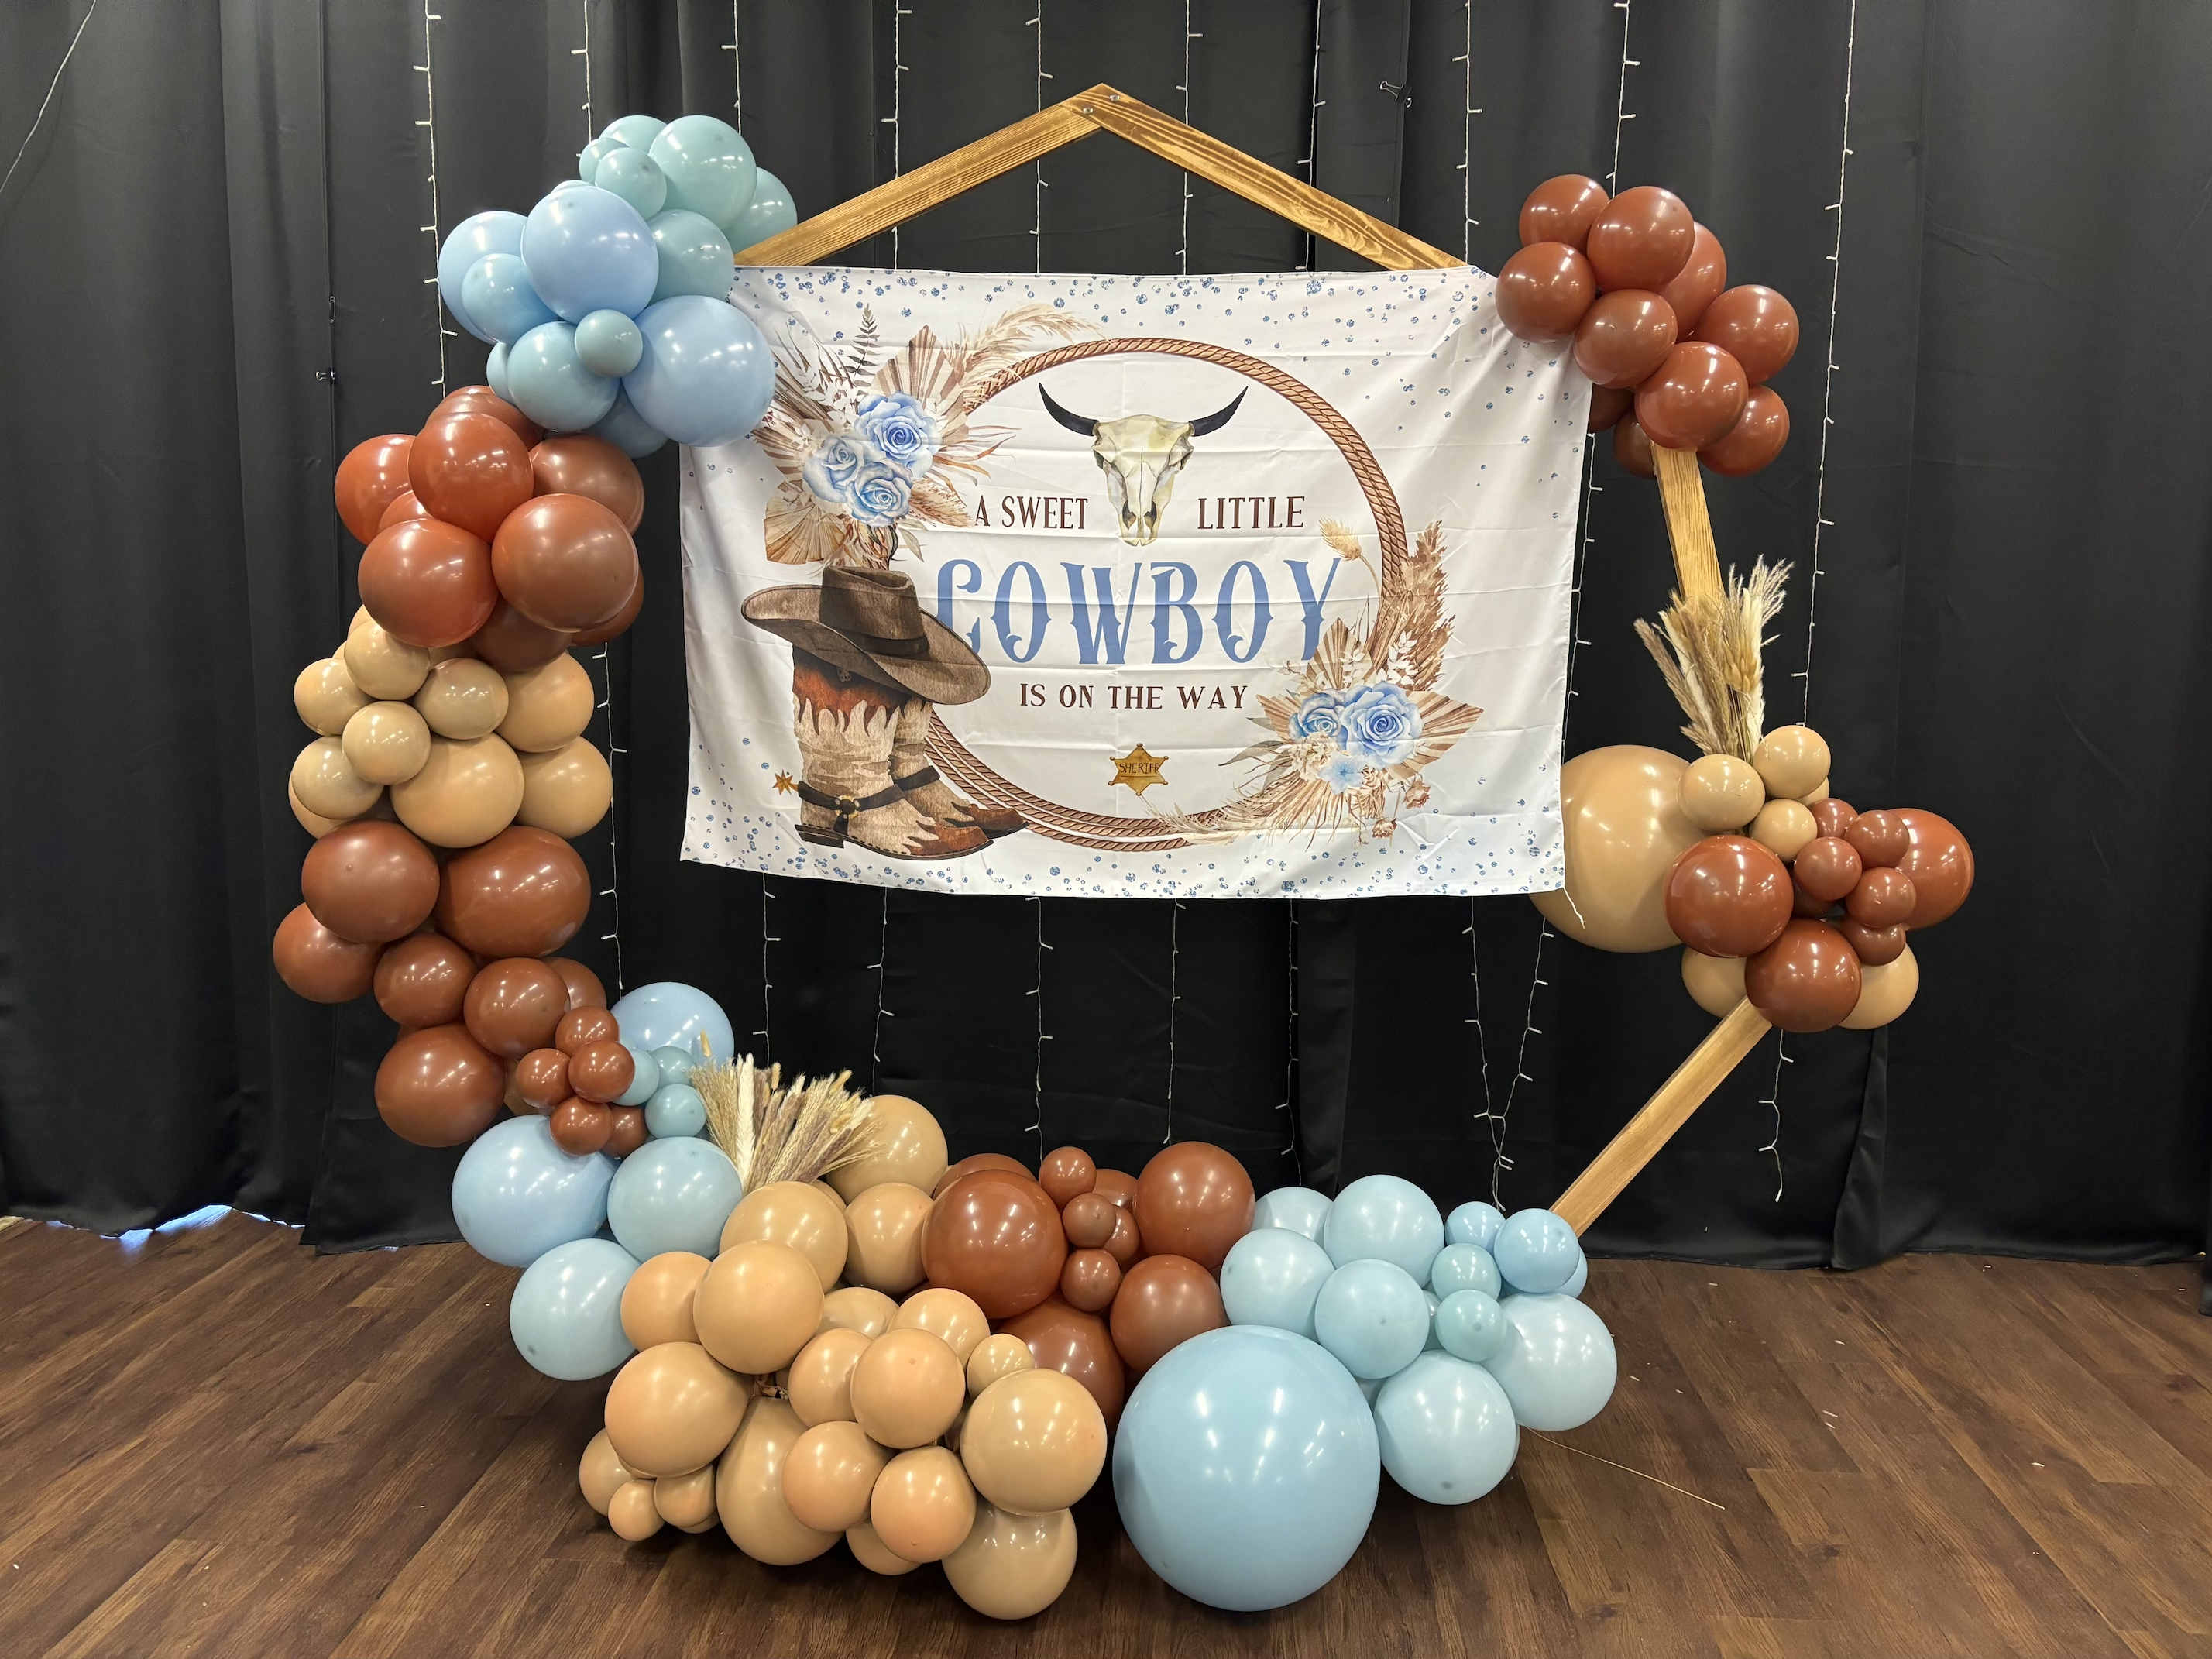 balloon arch arrangement for baby shower little boy colors brown baby blue and nude with a little cowboy is on the way banner in bullhead city FORT MOHAVE arizona